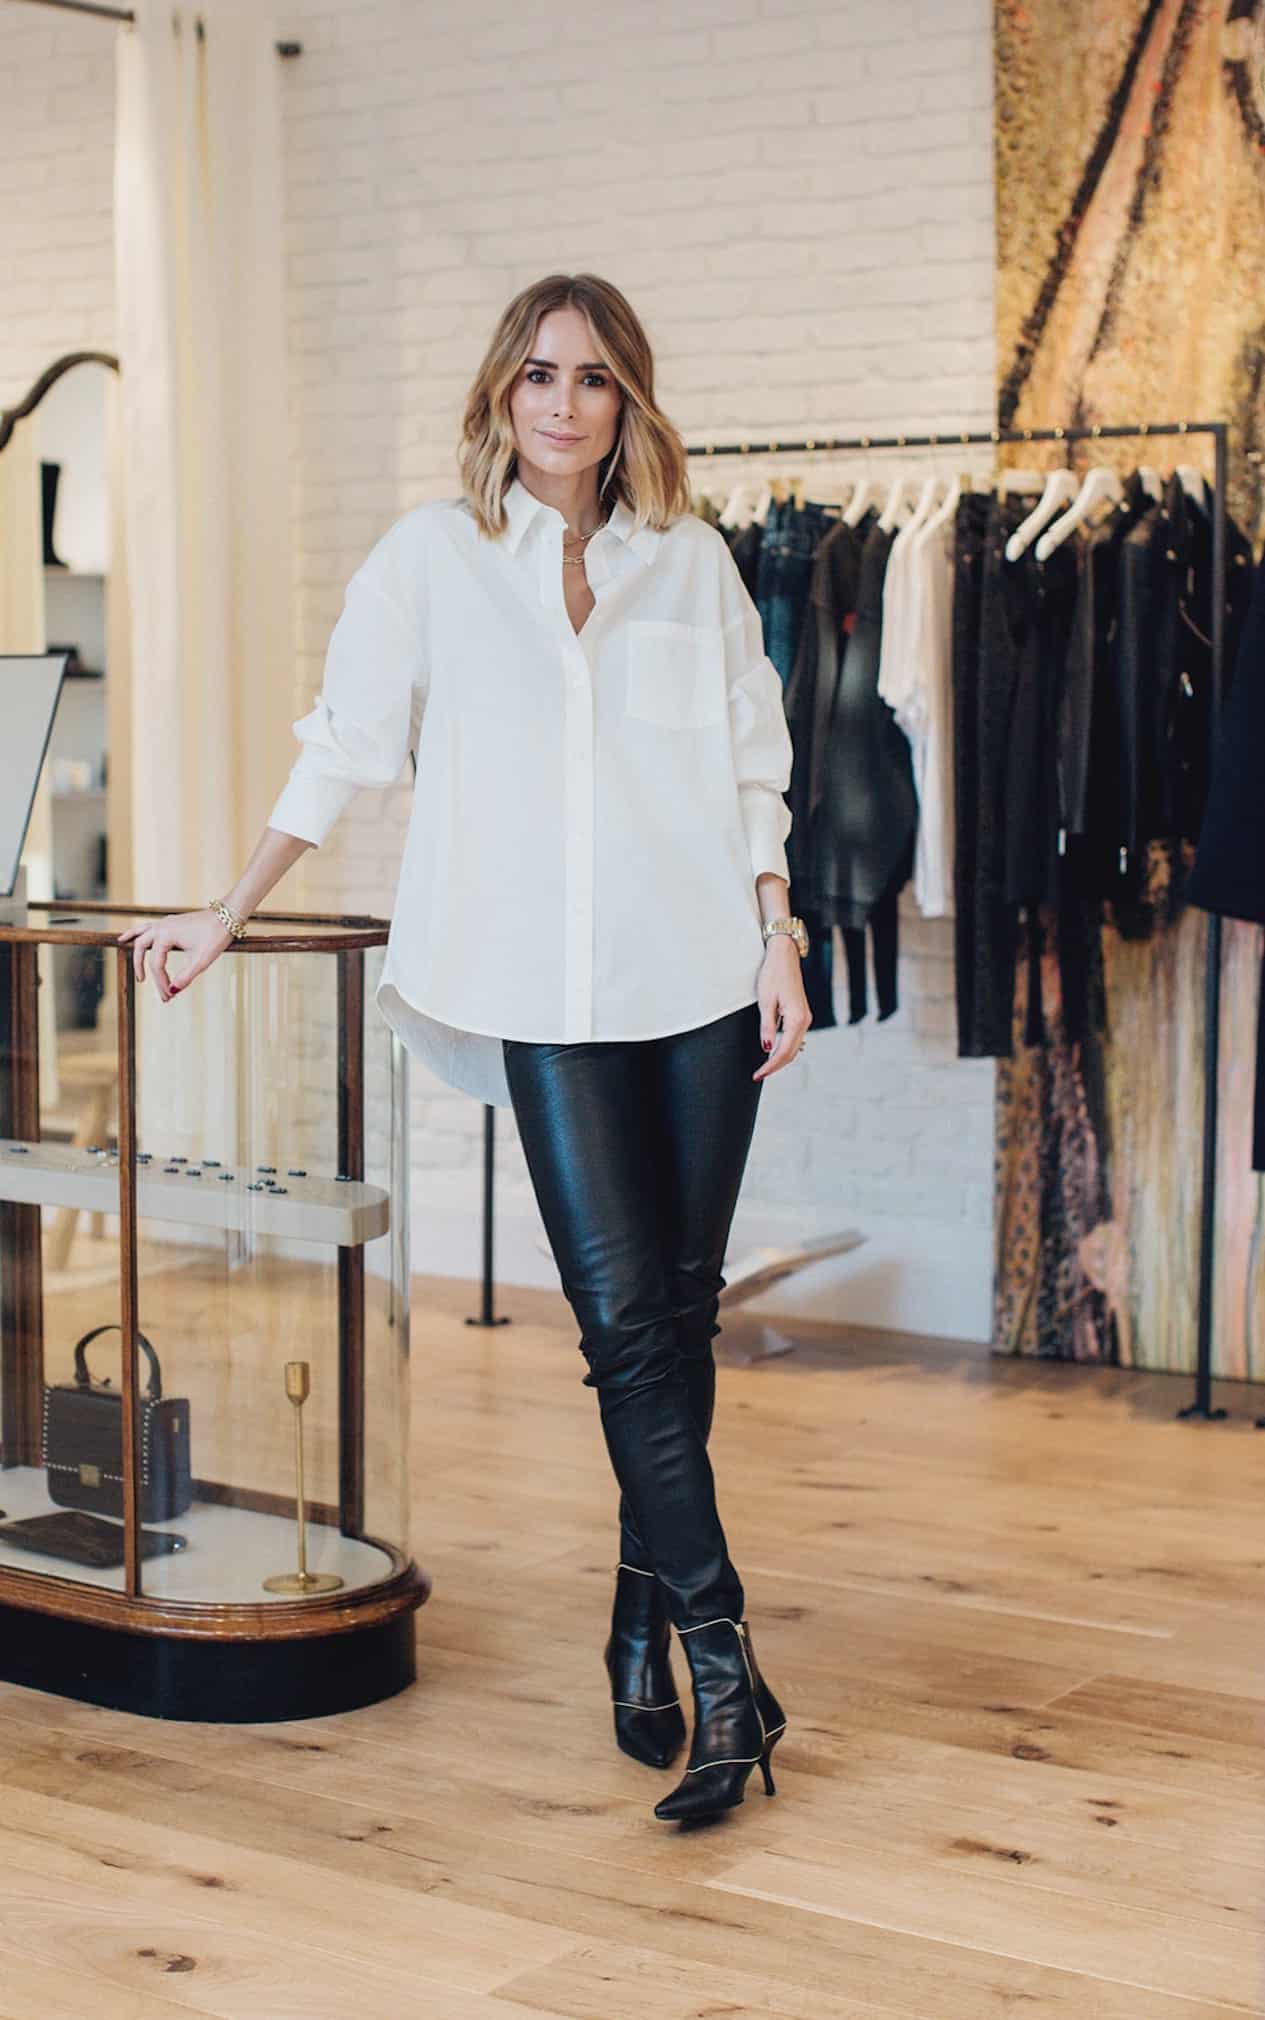 image of a woman wearing a white button down shirt, black leather leggings, and black ankle boots in a clothing store